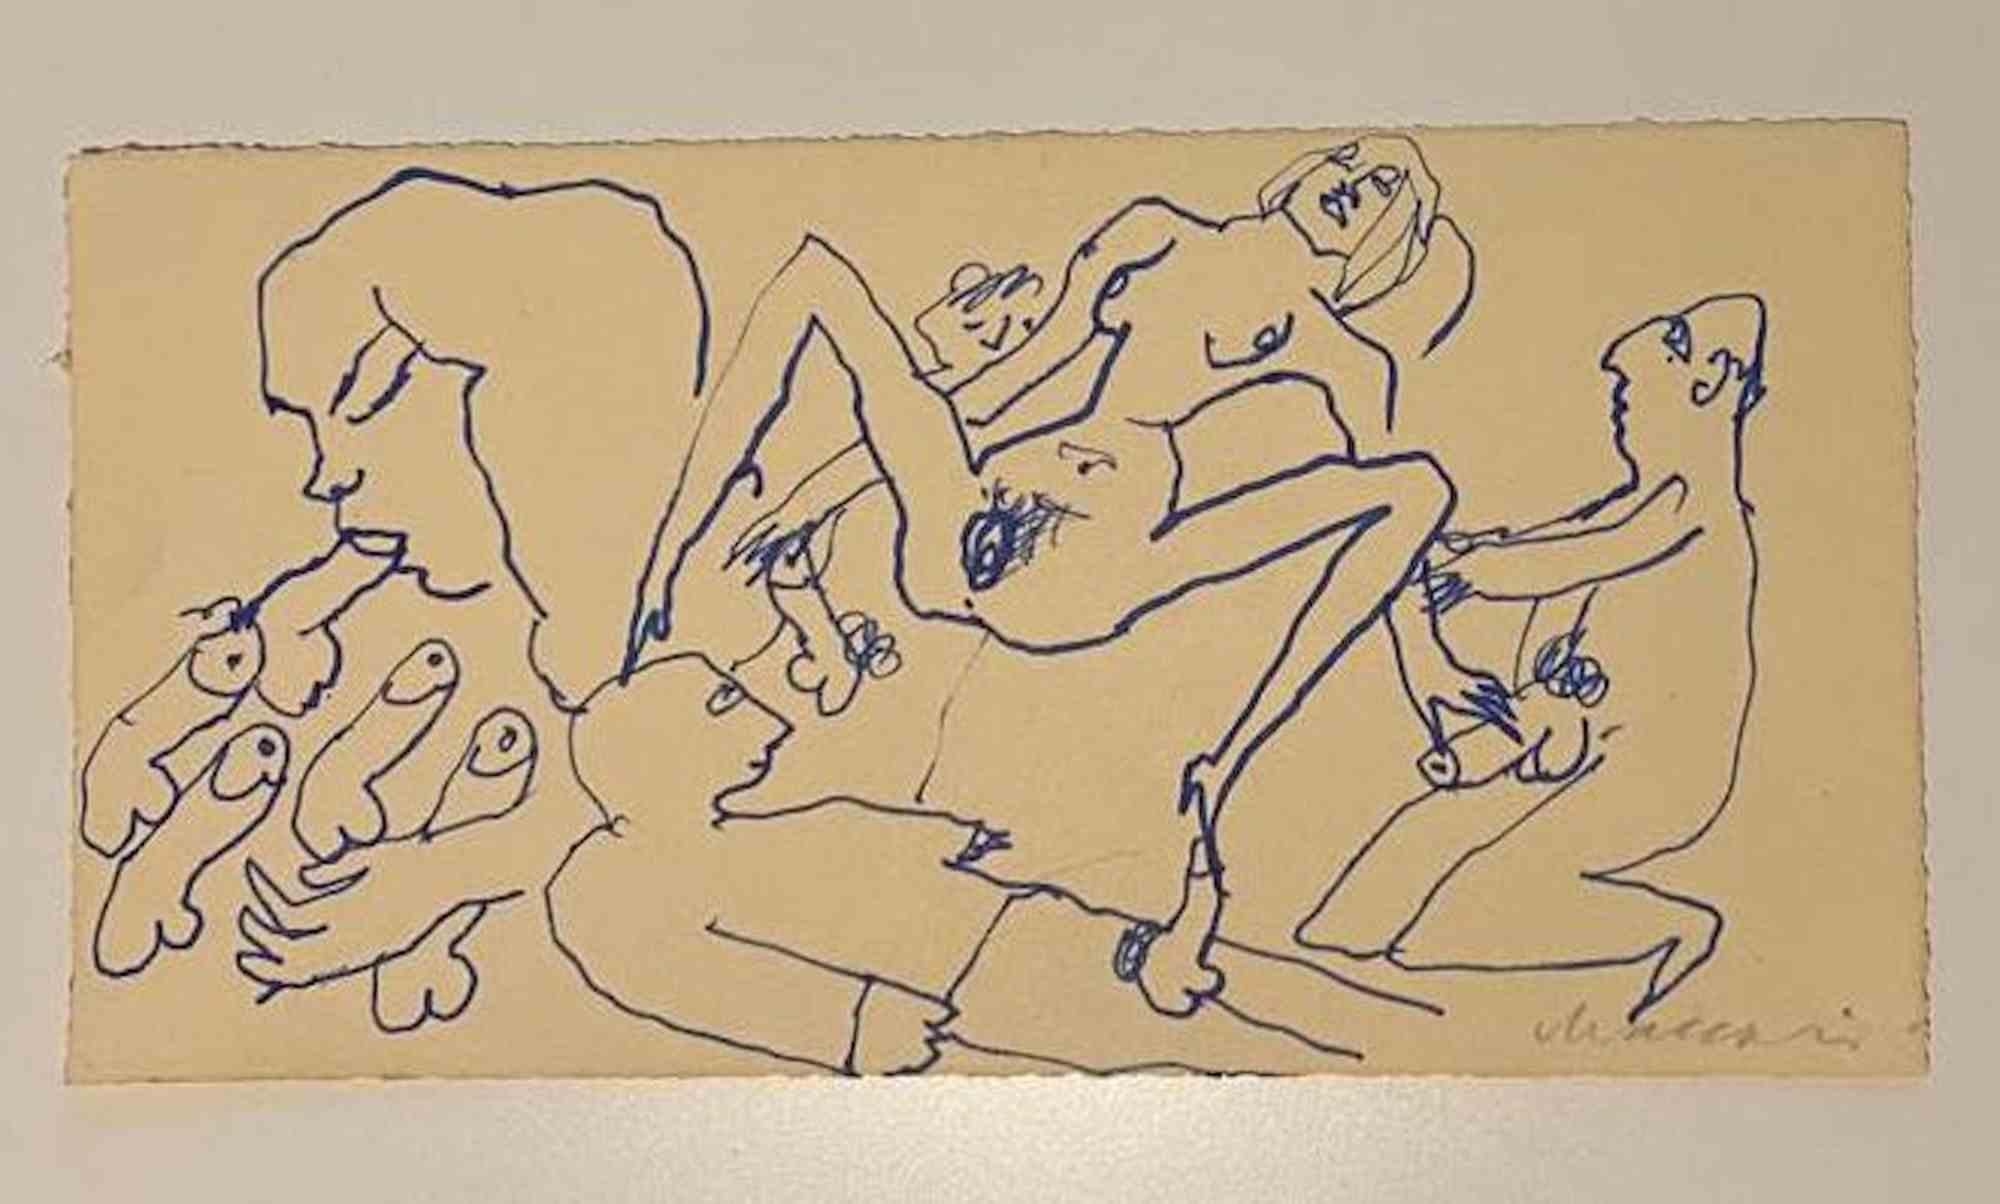 Orgy is a pen Drawing realized by Mino Maccari  (1924-1989) in the Mid-20th Century.

Hand-signed on the lower.

Good conditions.

Mino Maccari (Siena, 1924-Rome, June 16, 1989) was an Italian writer, painter, engraver and journalist, winner of the